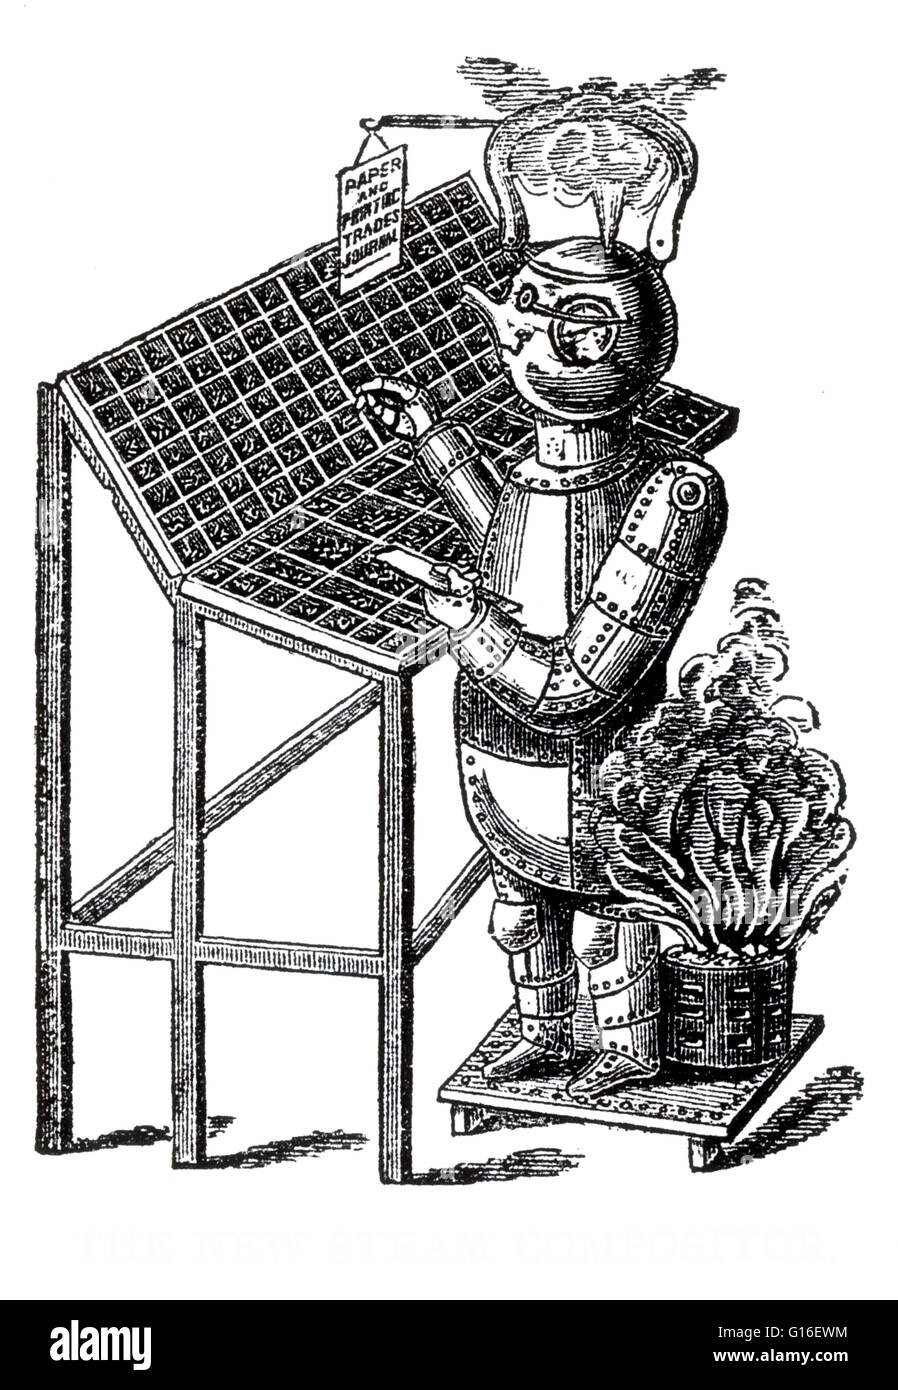 The term was first used fictional automata in a 1921 play R.U.R. by the Czech writer, Karel Capek. In 1928, one of the first humanoid robots was exhibited at